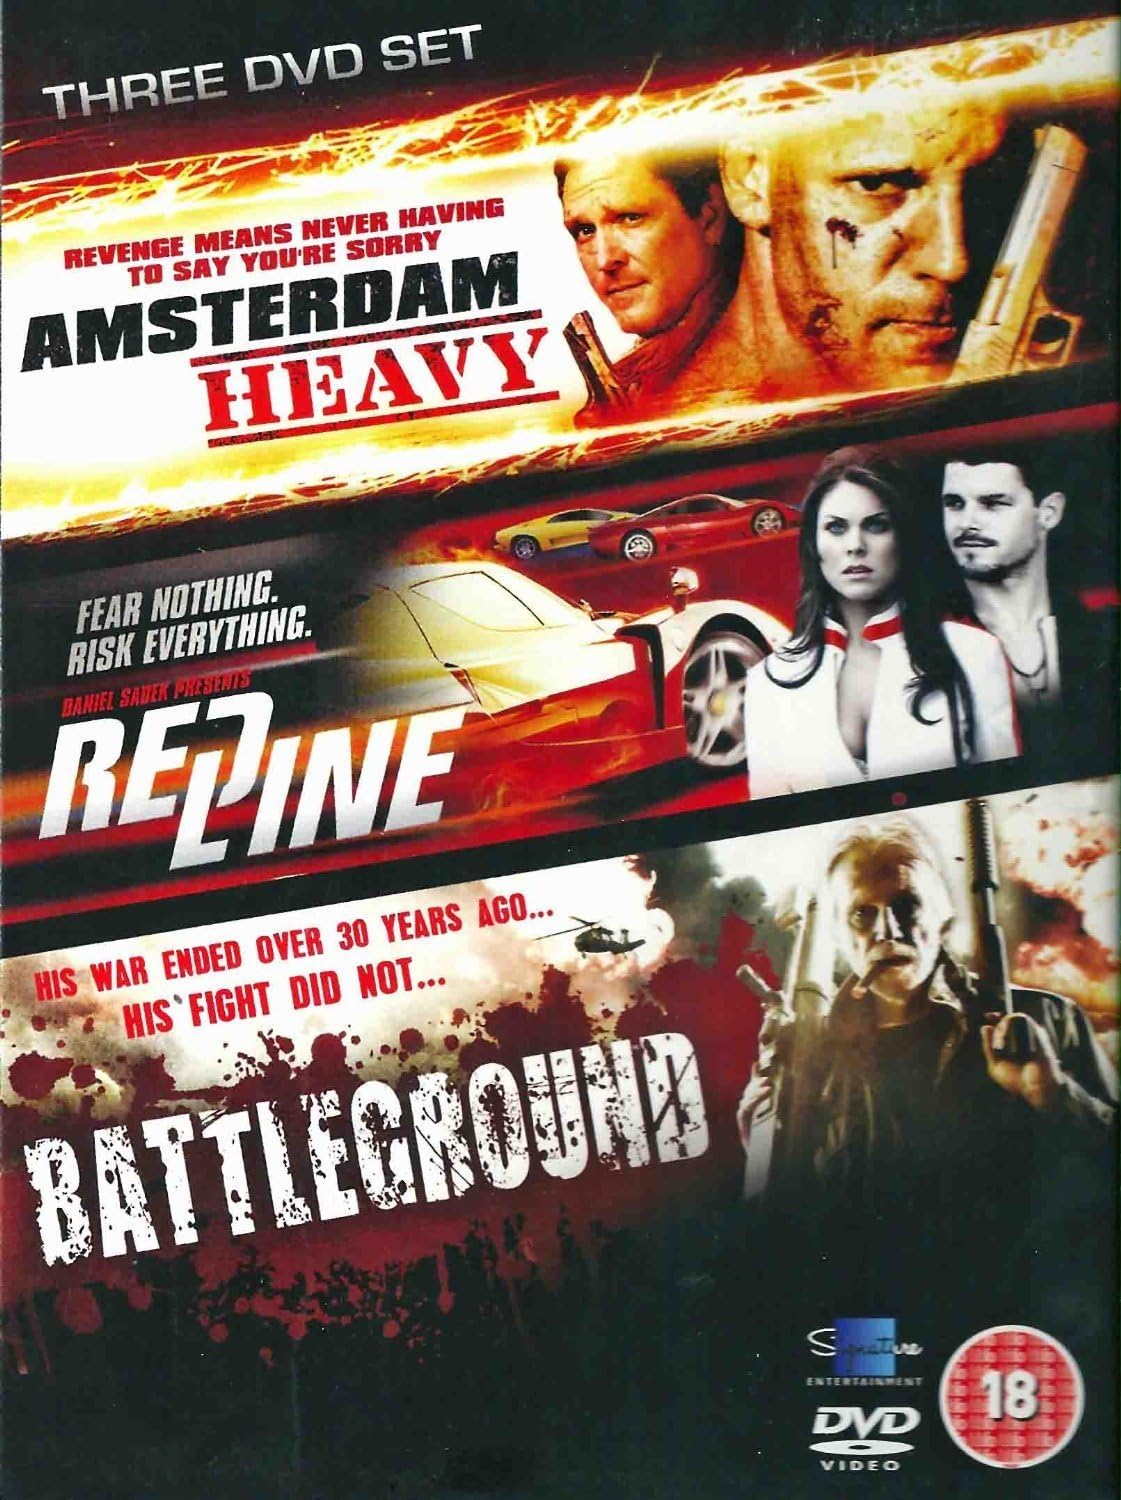 Amsterdam Heavy / Red Line / Battleground Triple DVD Set Rated 18 (2012) RRP 4.50 CLEARANCE XL 1.99